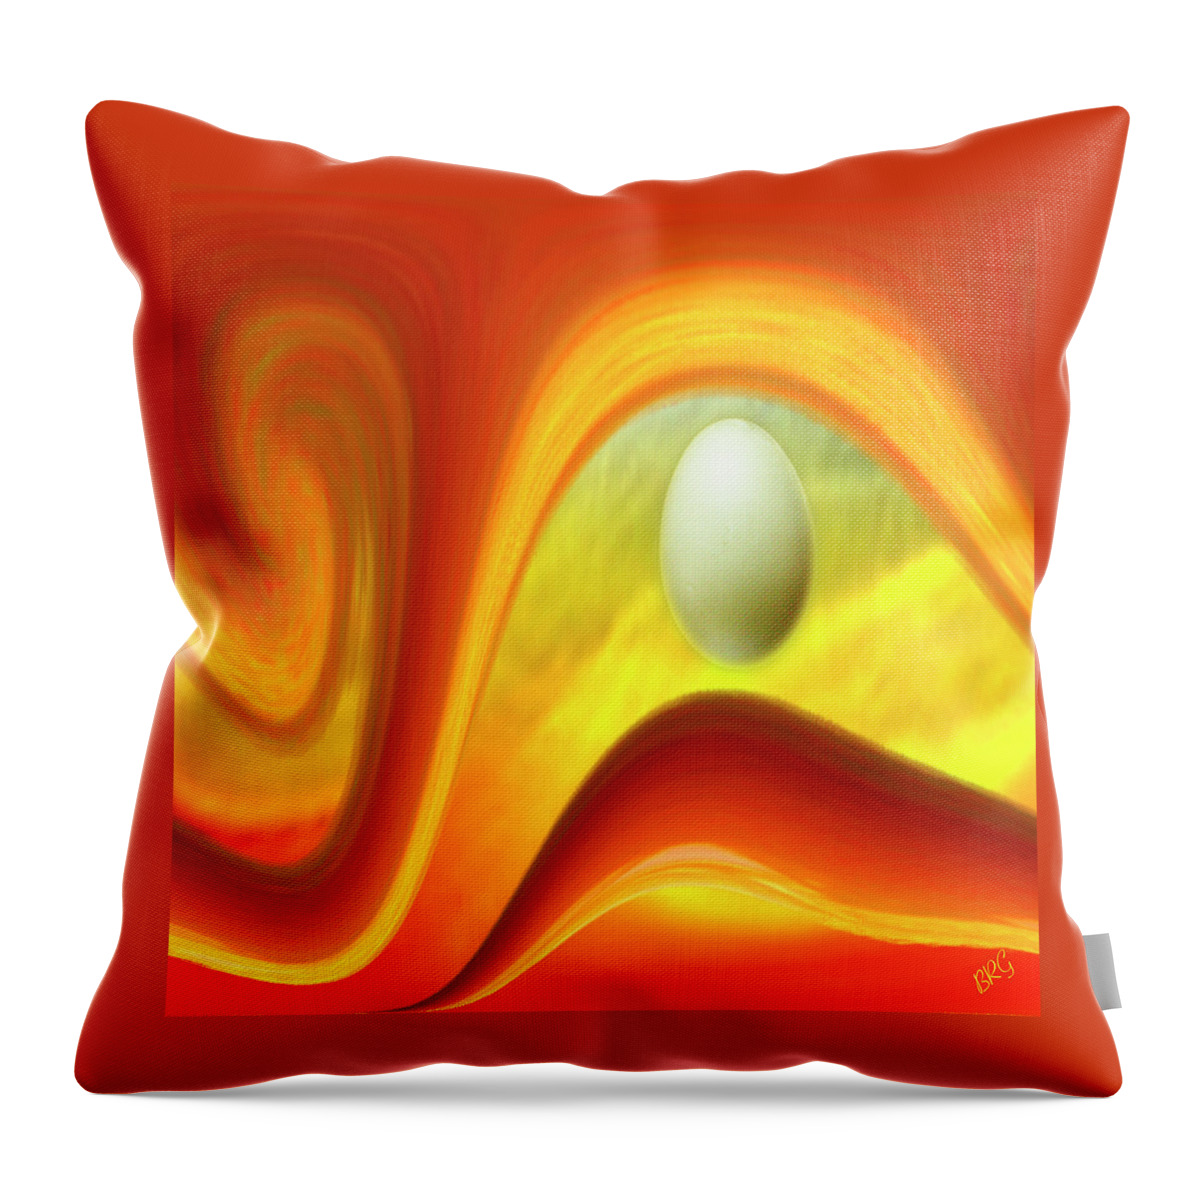 Surreal Throw Pillow featuring the digital art In The Beginning by Ben and Raisa Gertsberg